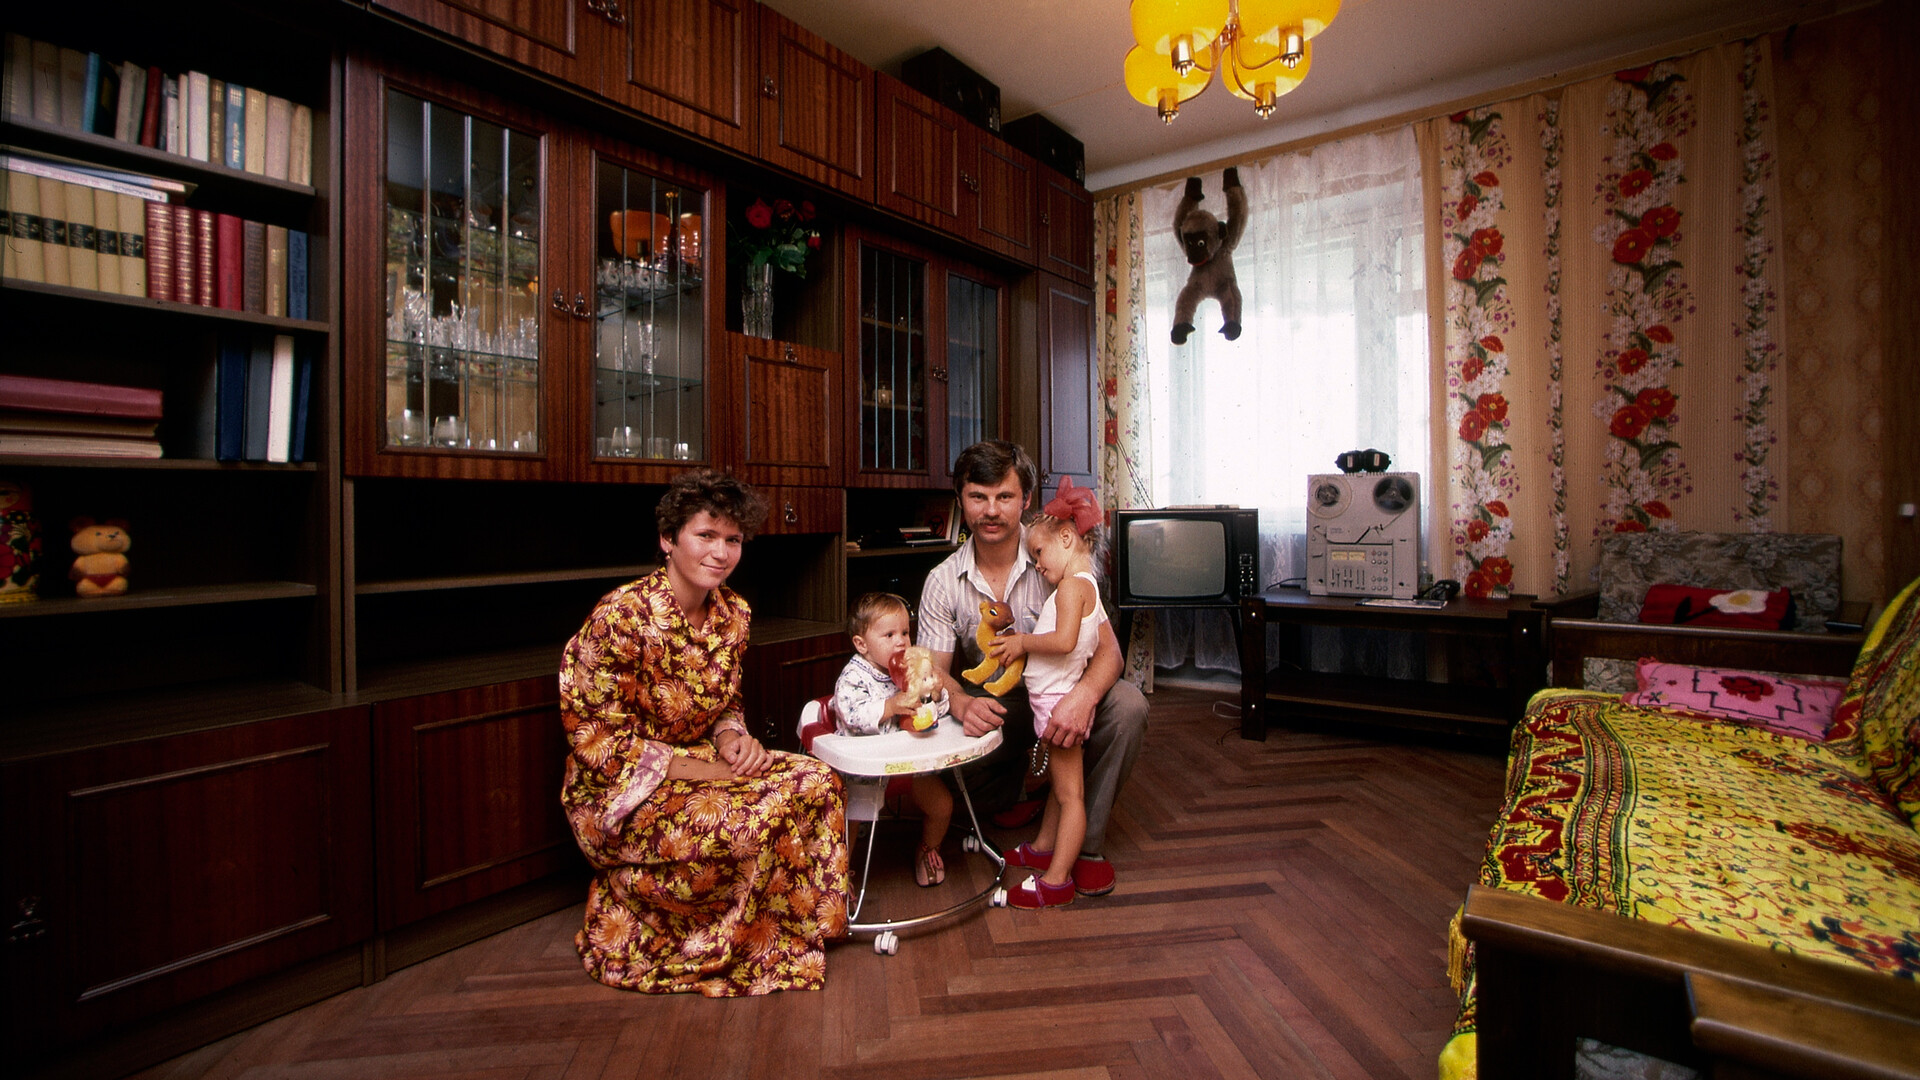 Moscow apartment, 1987